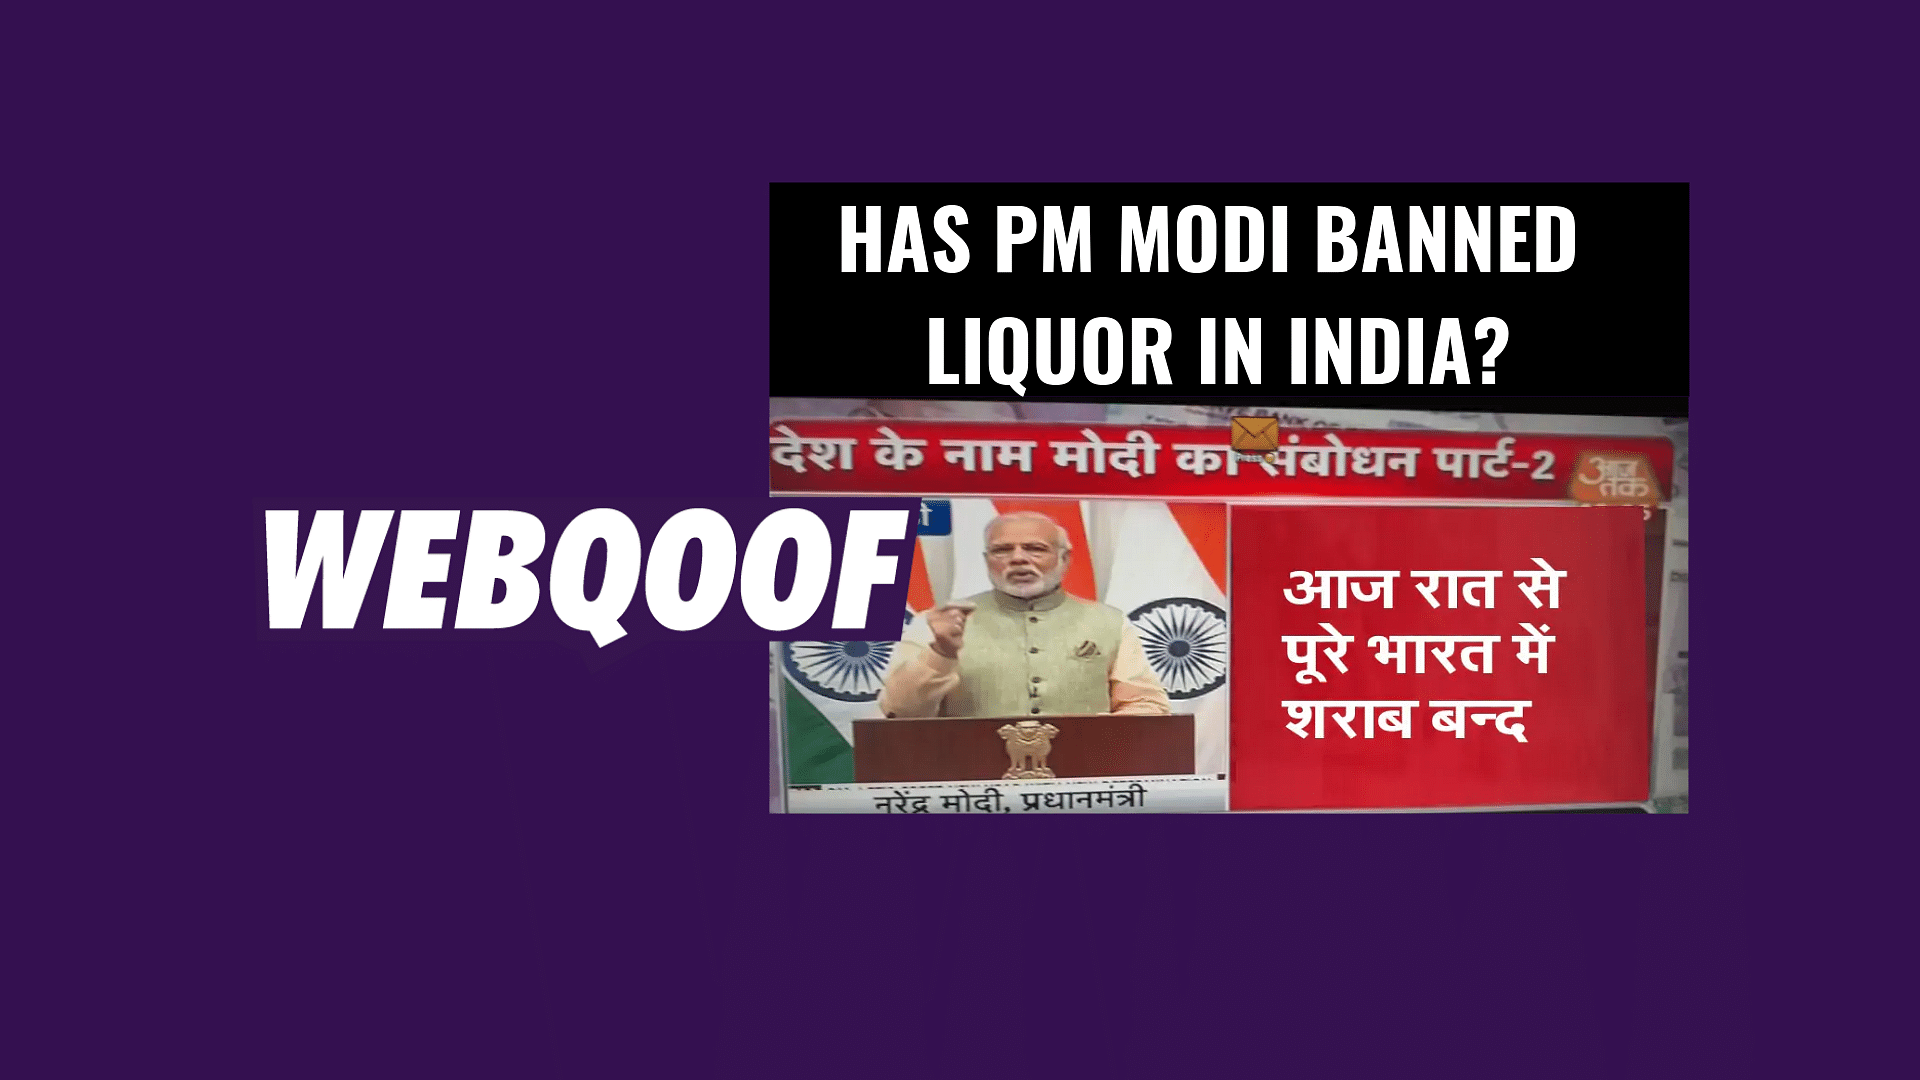 A viral image on social media falsely claimed that PM Narendra Modi has banned liquor in India.